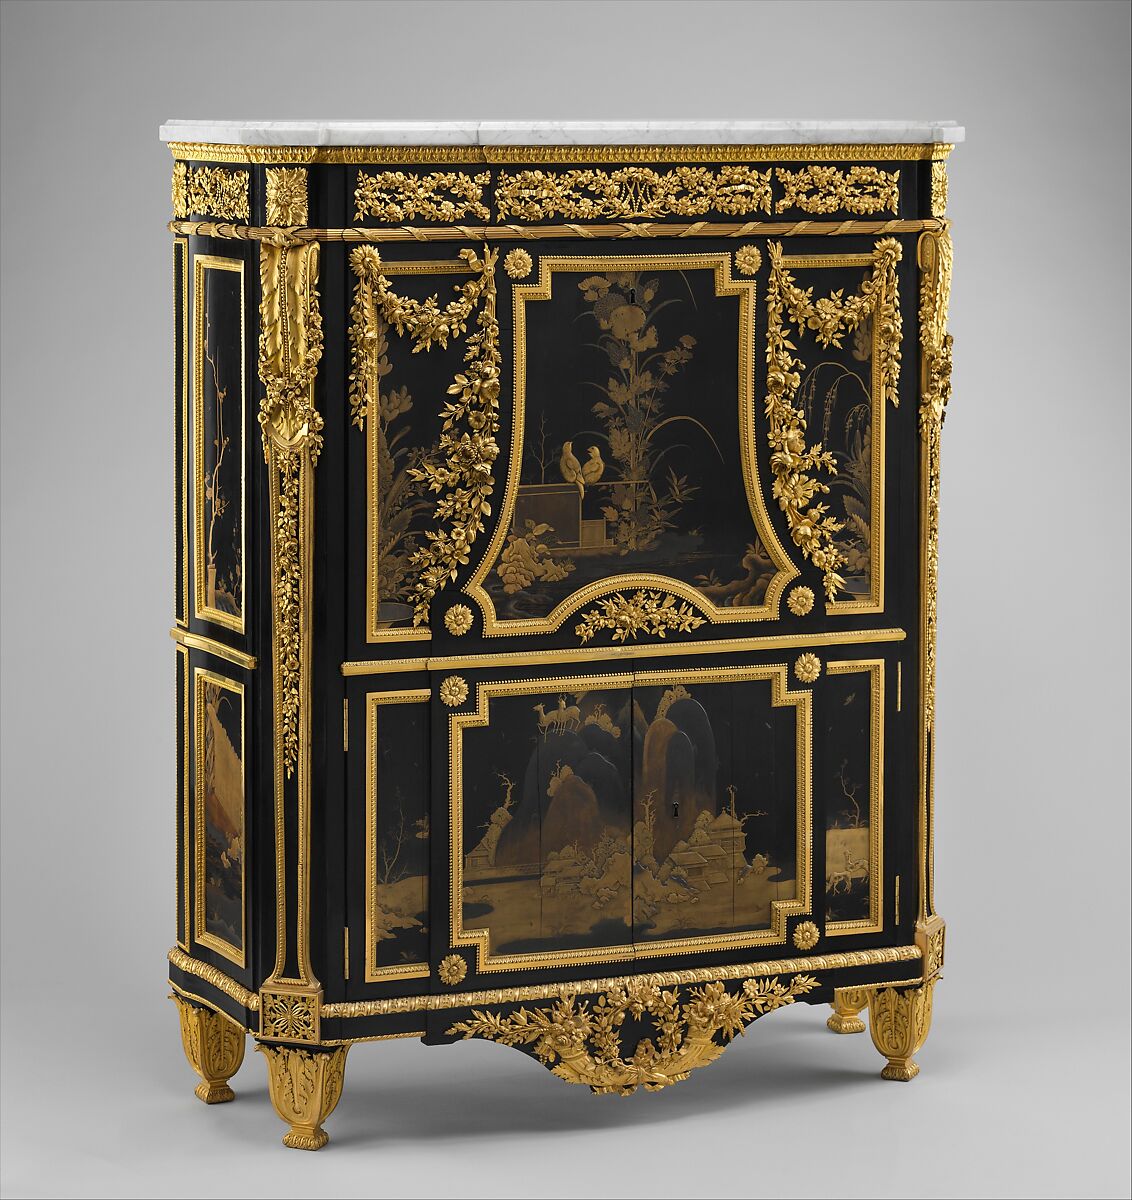 Drop-front secretary (Secrétaire en armoire), Jean Henri Riesener (French, Gladbeck, North Rhine-Westphalia 1734–1806 Paris), Oak veneered with ebony and 17th-century Japanese lacquer; interiors veneered with tulipwood, amaranth, holly, and ebonized holly; gilt-bronze mounts; marble top; velvet (not original), French, Paris 